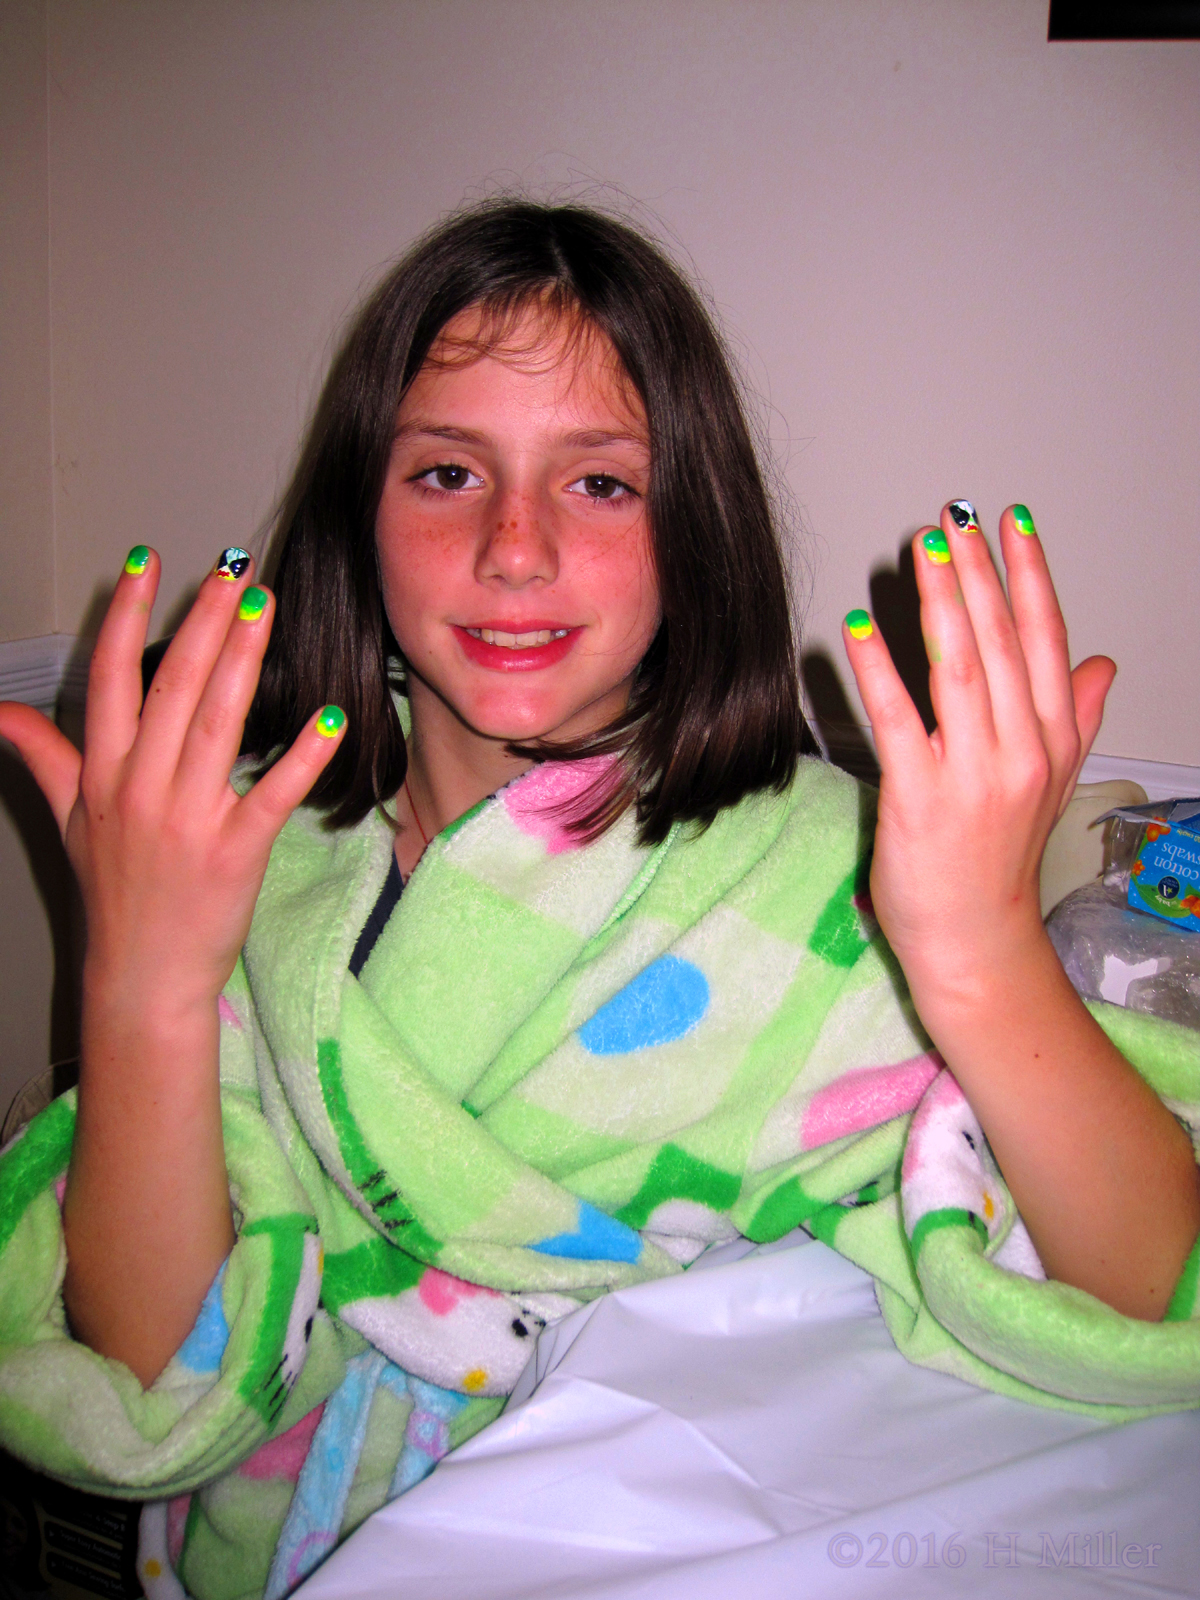 Showing Her Cool Nail Designs On Her Manicure. 